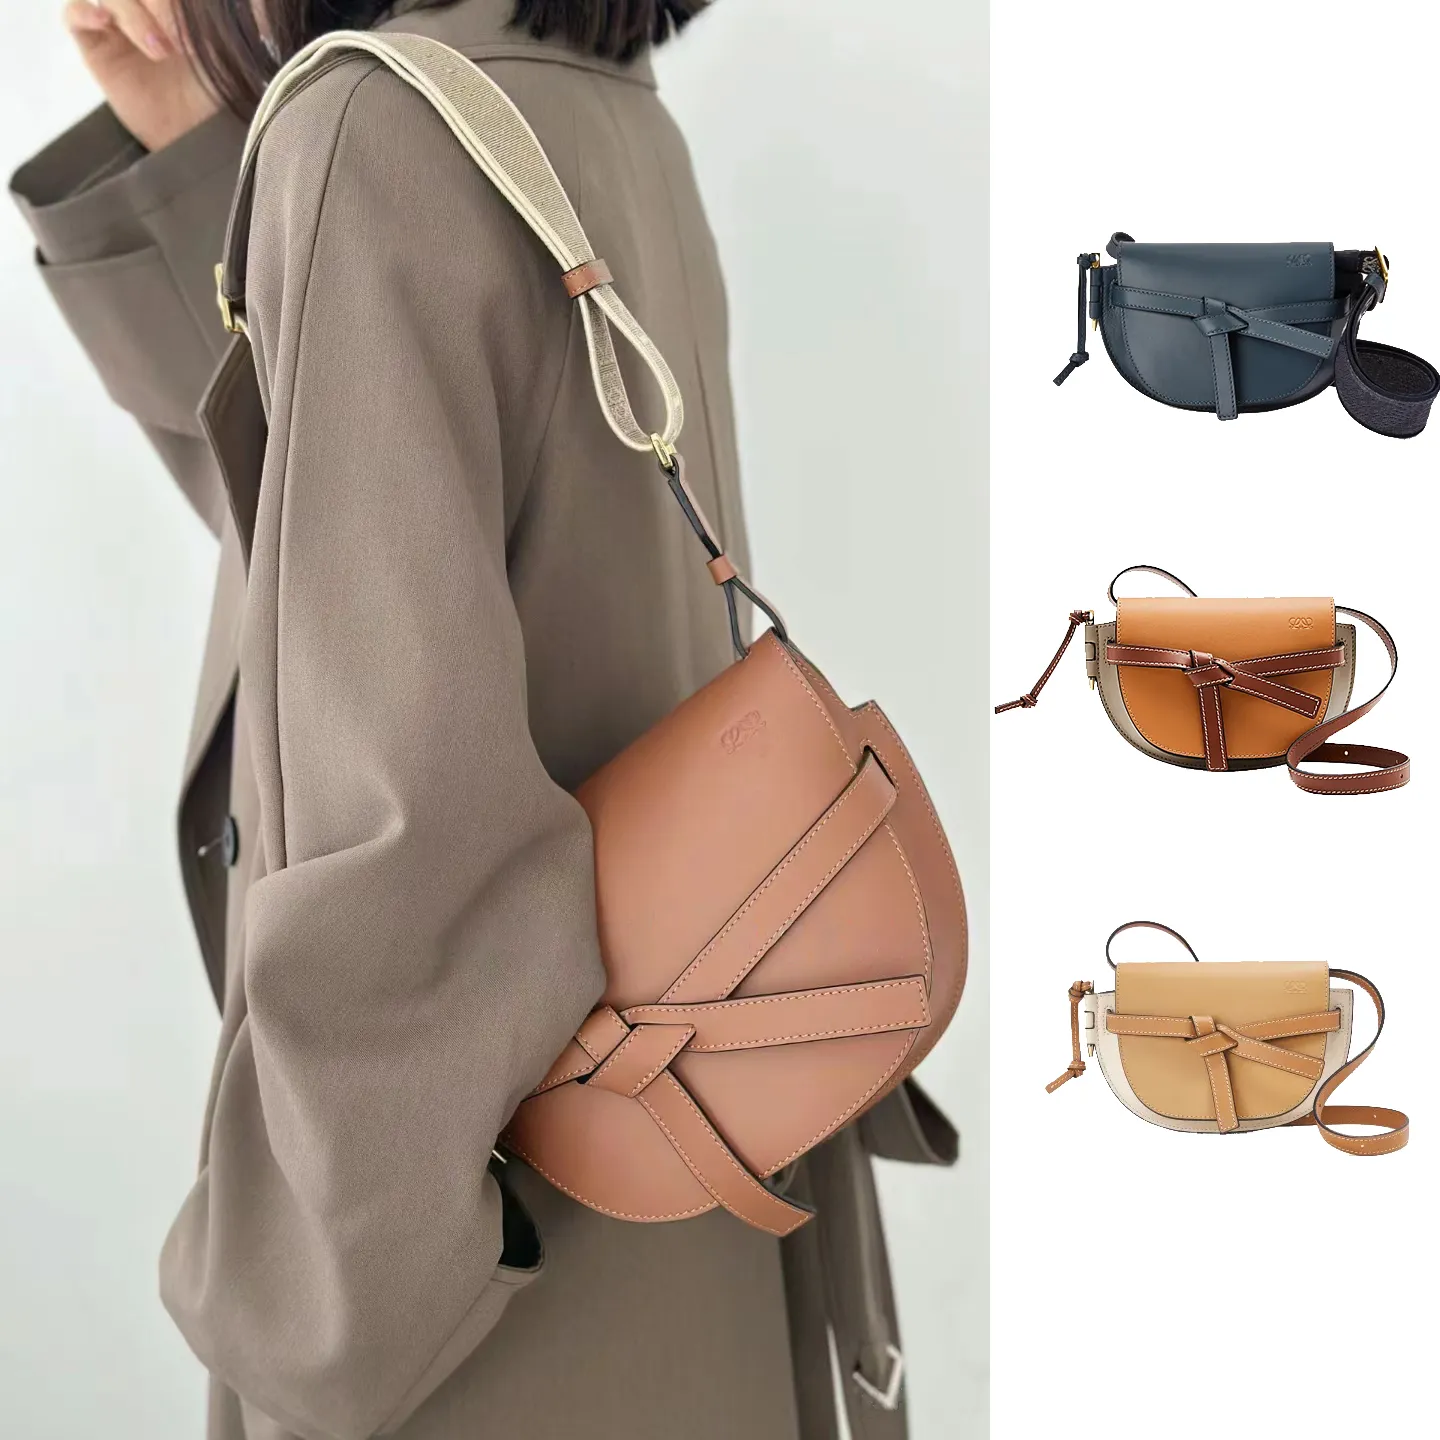 Gate Dual puzzle saddle Luxury Designer bags Womens Cross Body mens Clutch fashion Wallet Leather Shoulder Bags straps 2 sizes Top quality satchel lady small hand bag